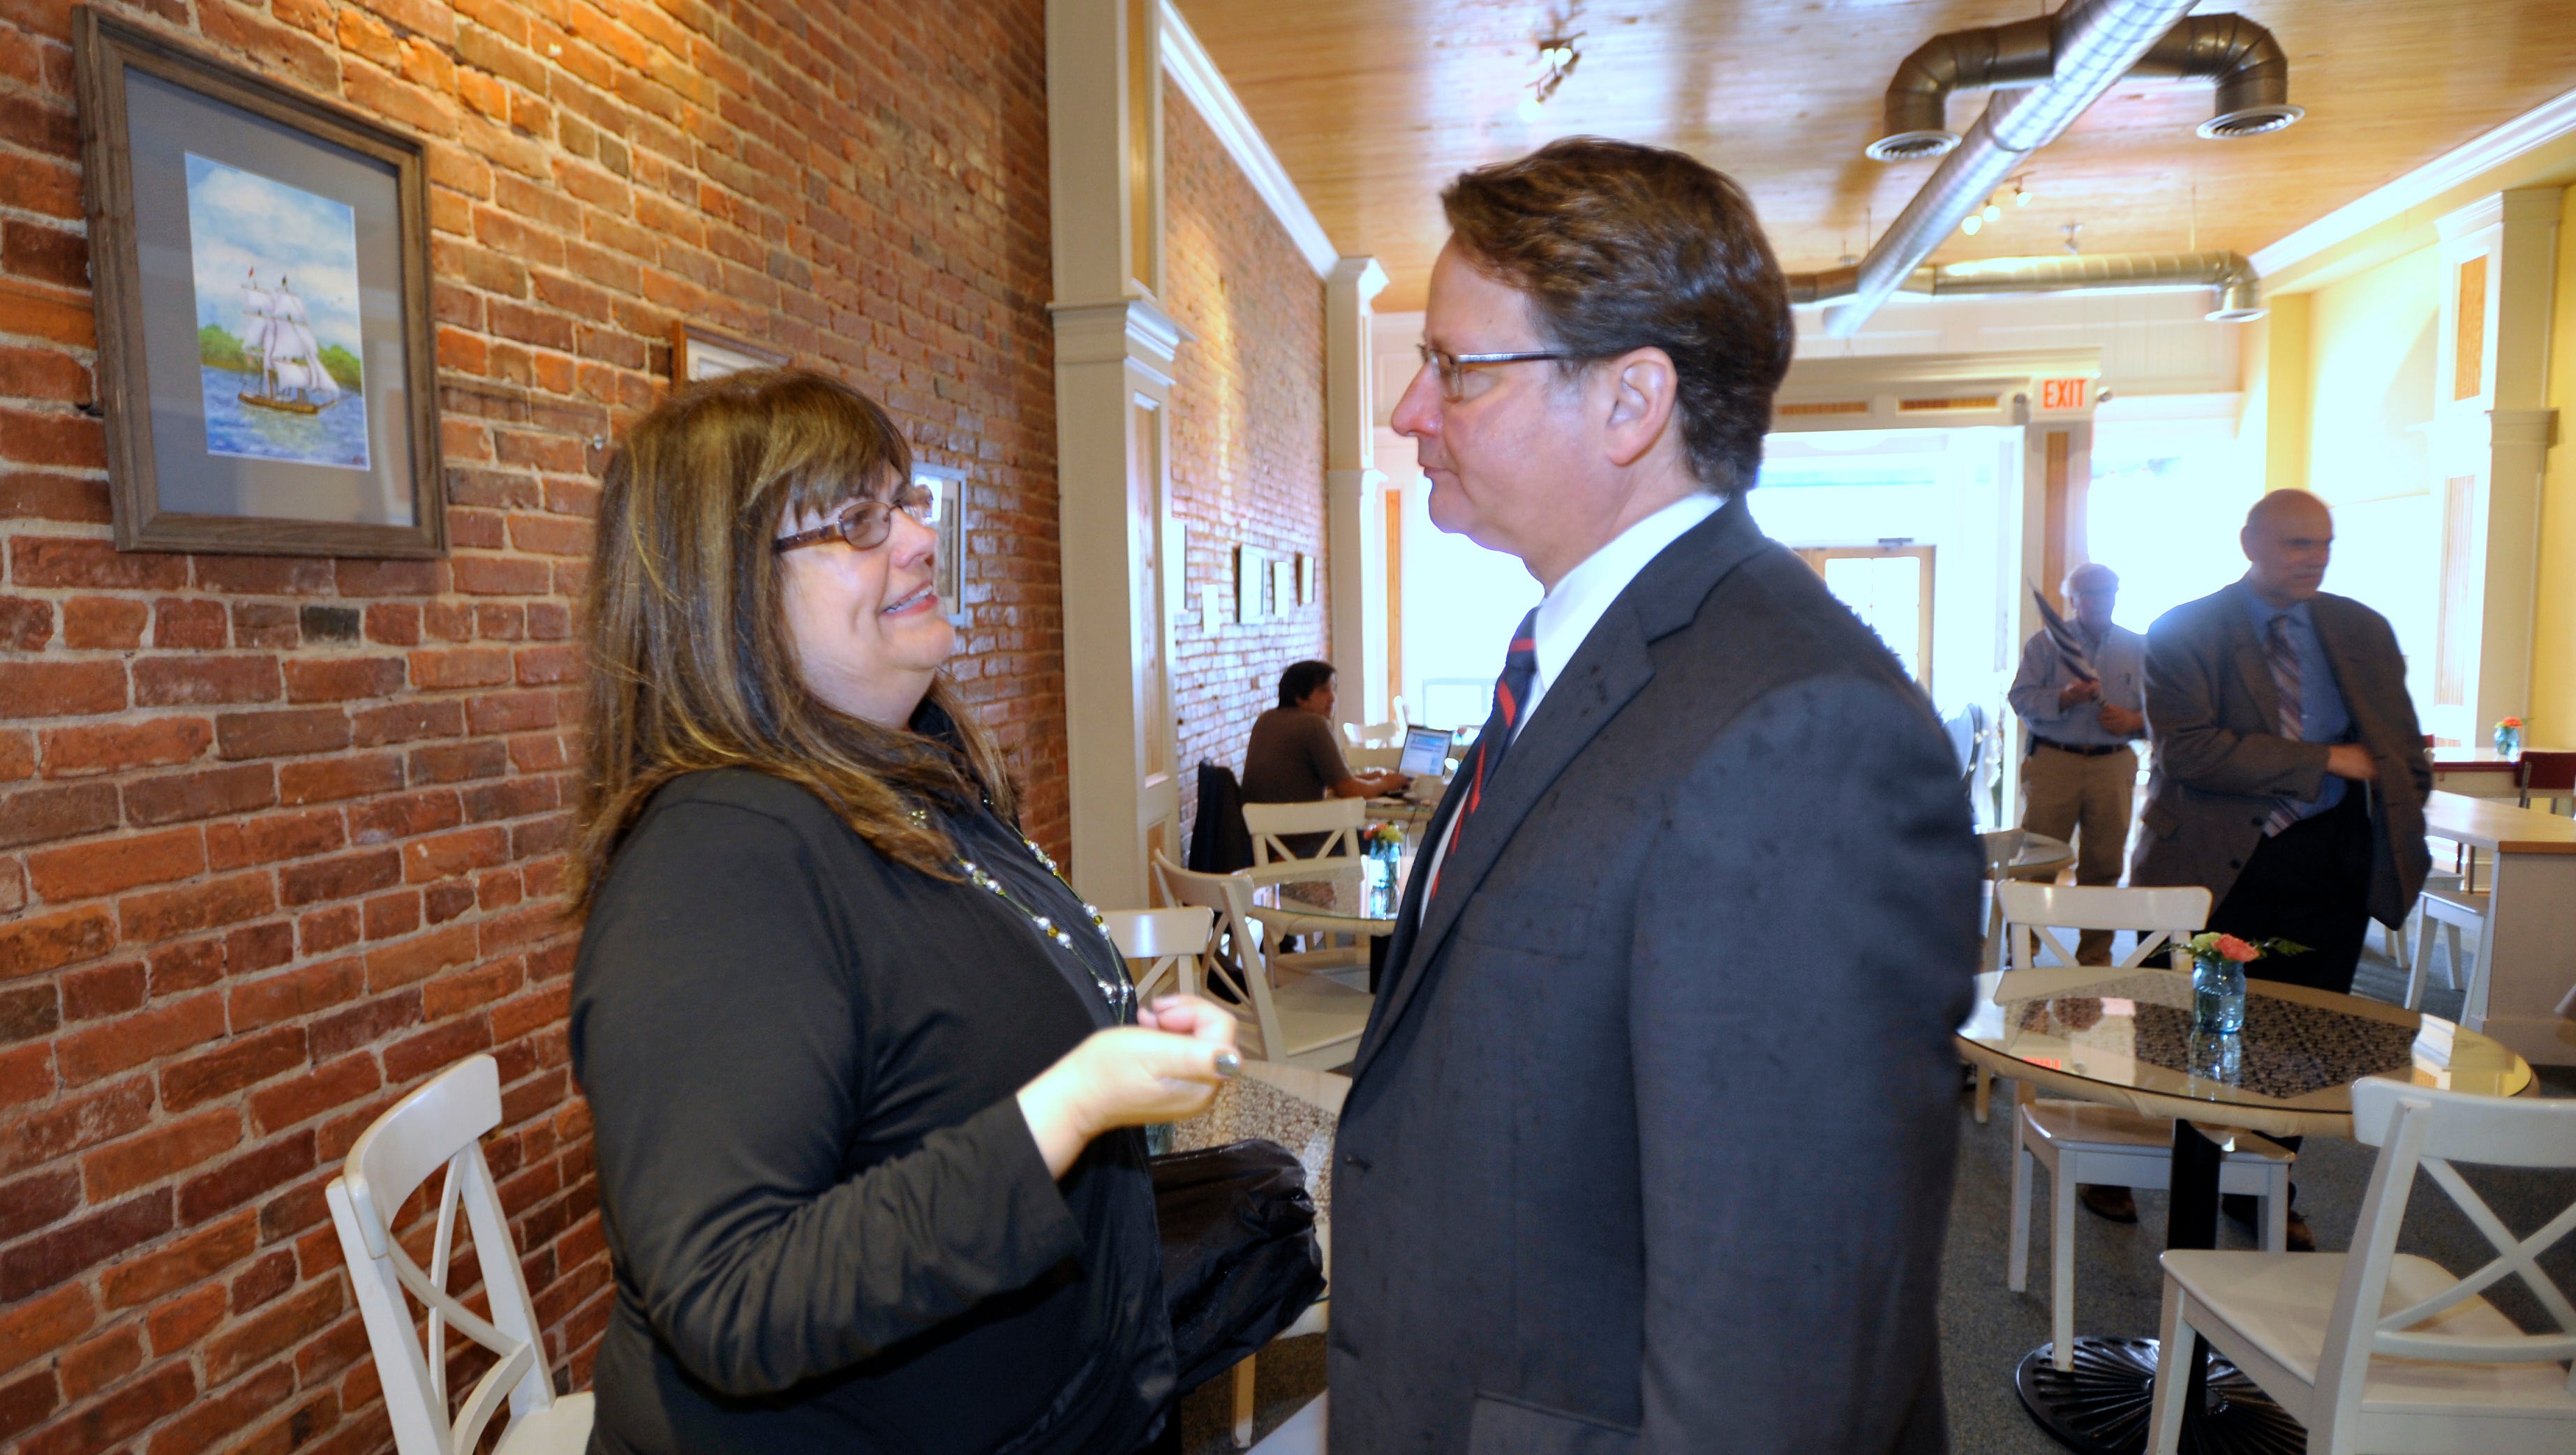 U.S. Congressman Gary Peters, right, talks with friend Kathie Trongo, left, of Port Huron, before lunch at Kate's Downtown.